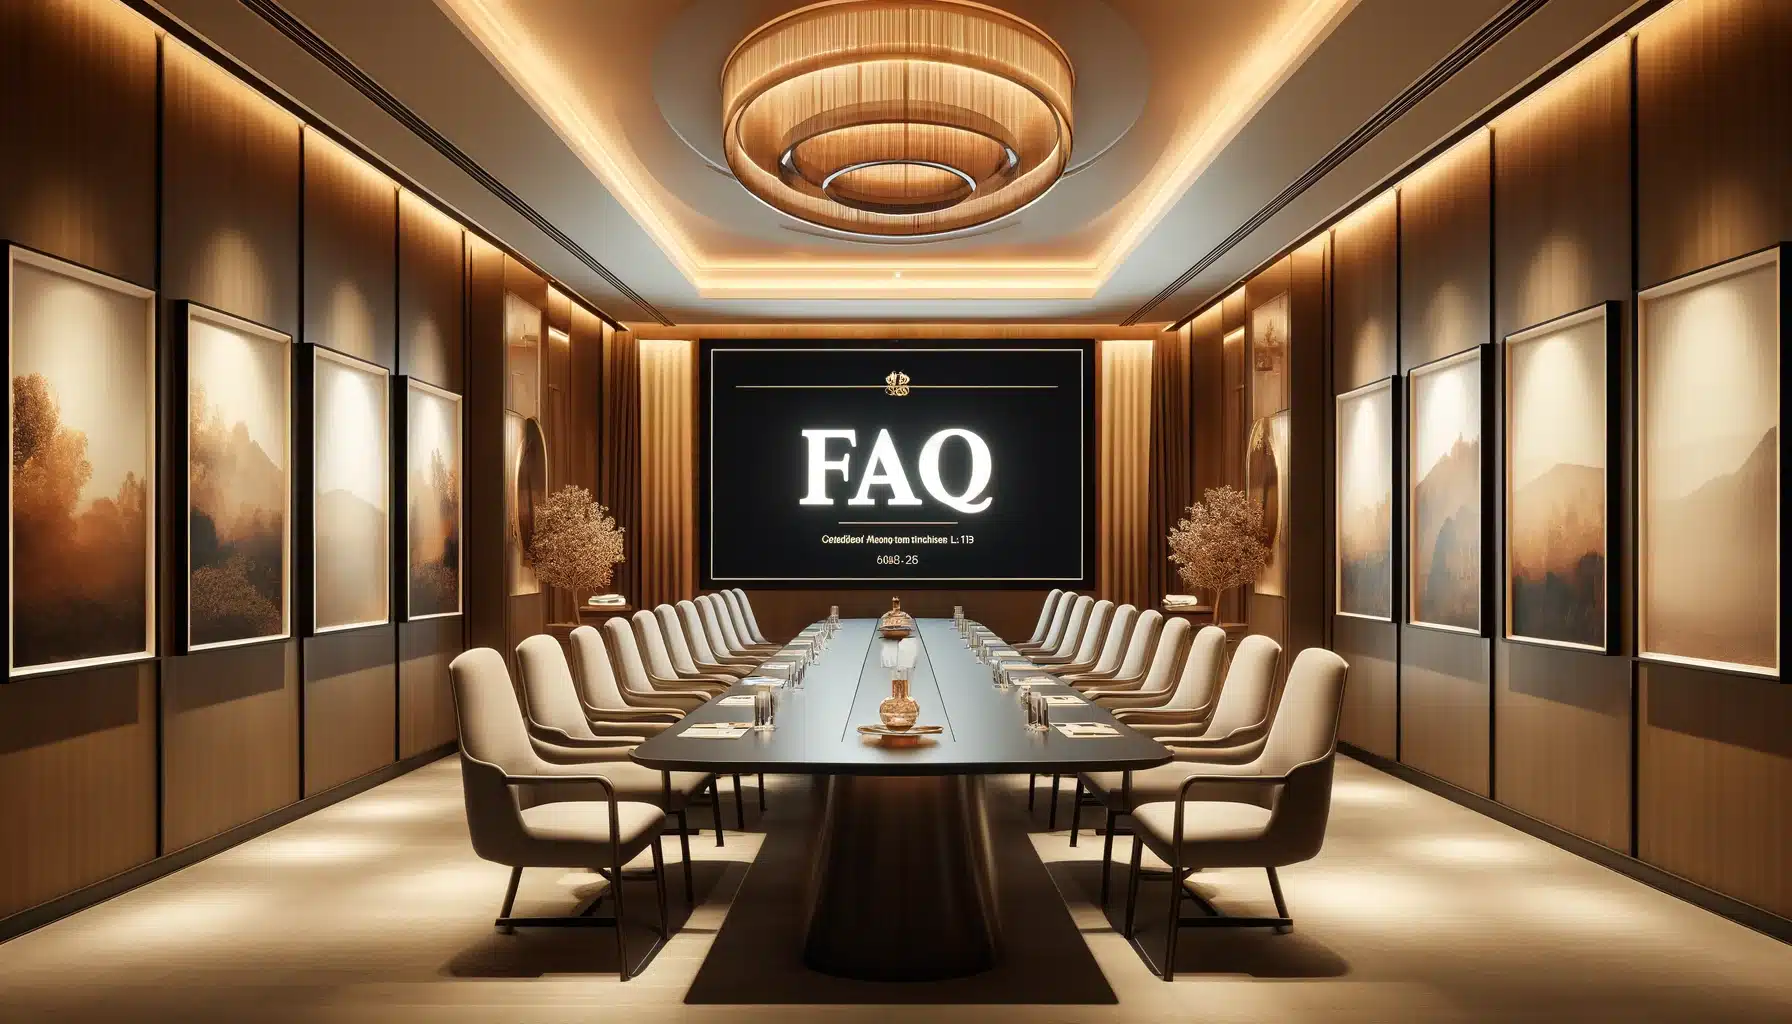 A sophisticated conference room with a large screen showing 'FAQ', complete with a long table, comfortable seating, and chic decor under warm lighting.